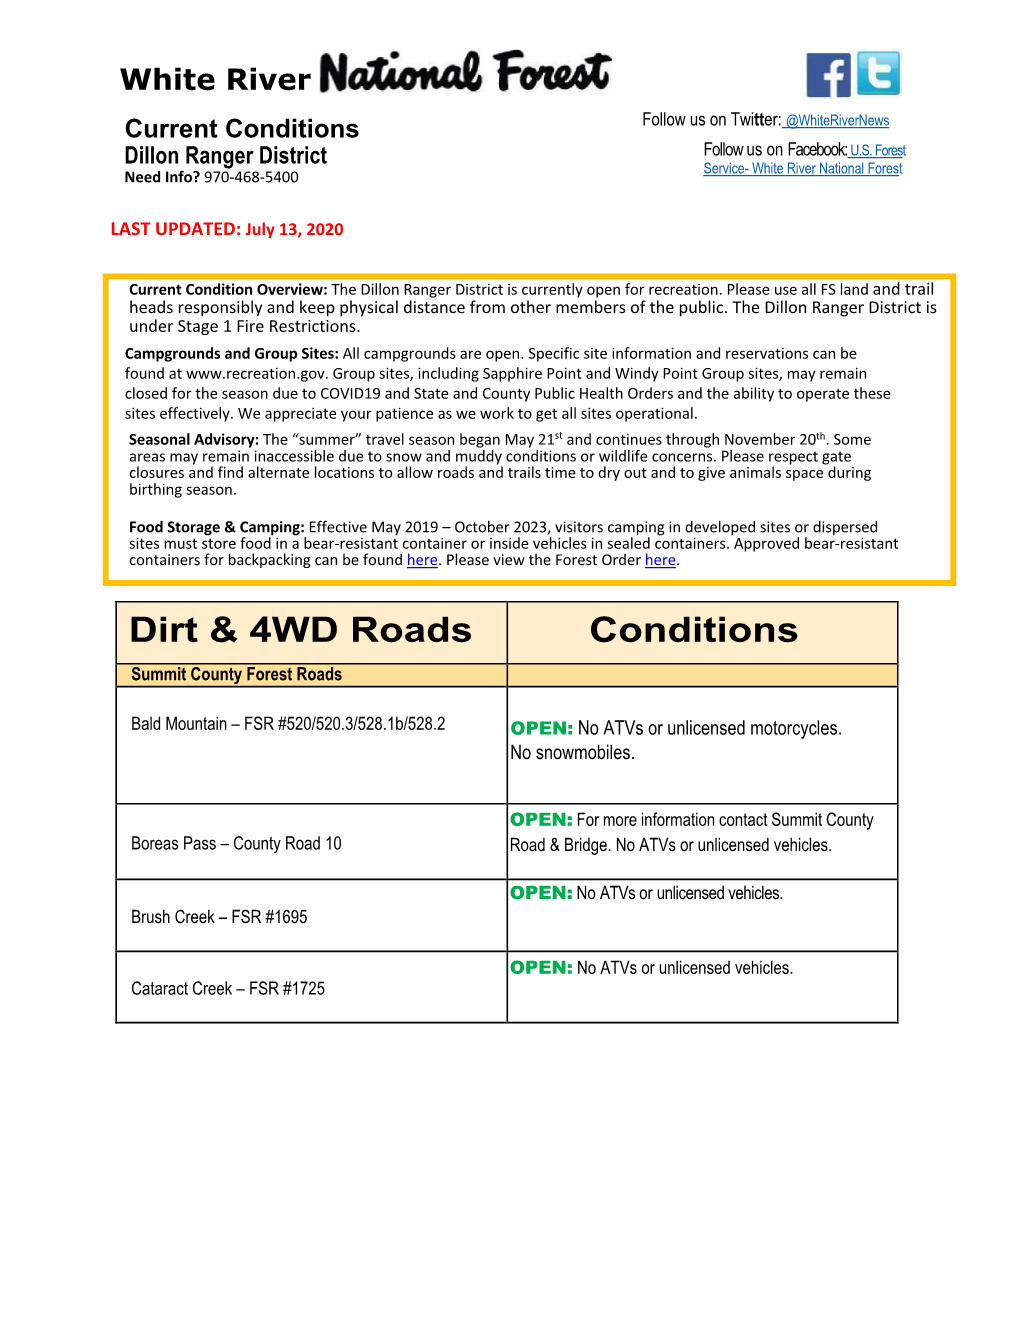 Dirt & 4WD Roads Conditions